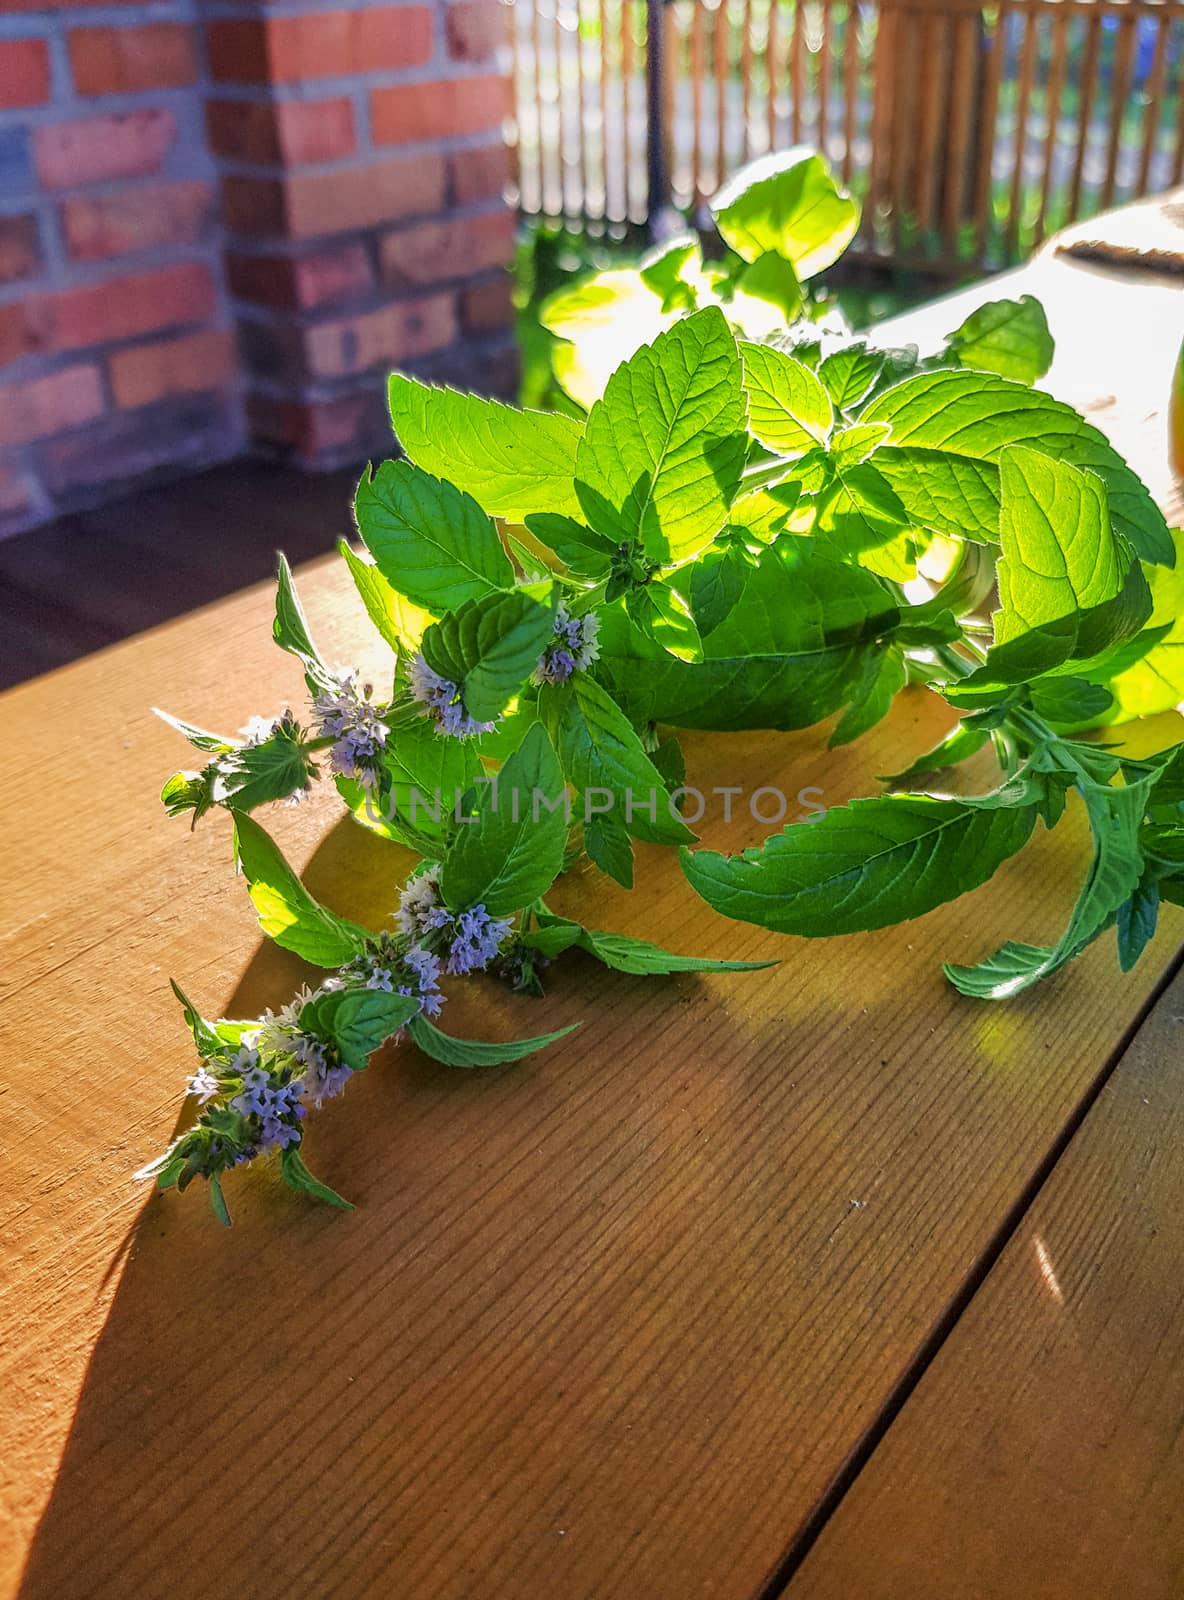 Blooming sprig of mint on a wooden background, evening Sunny Golden light, outdoor, close-up, romantic.